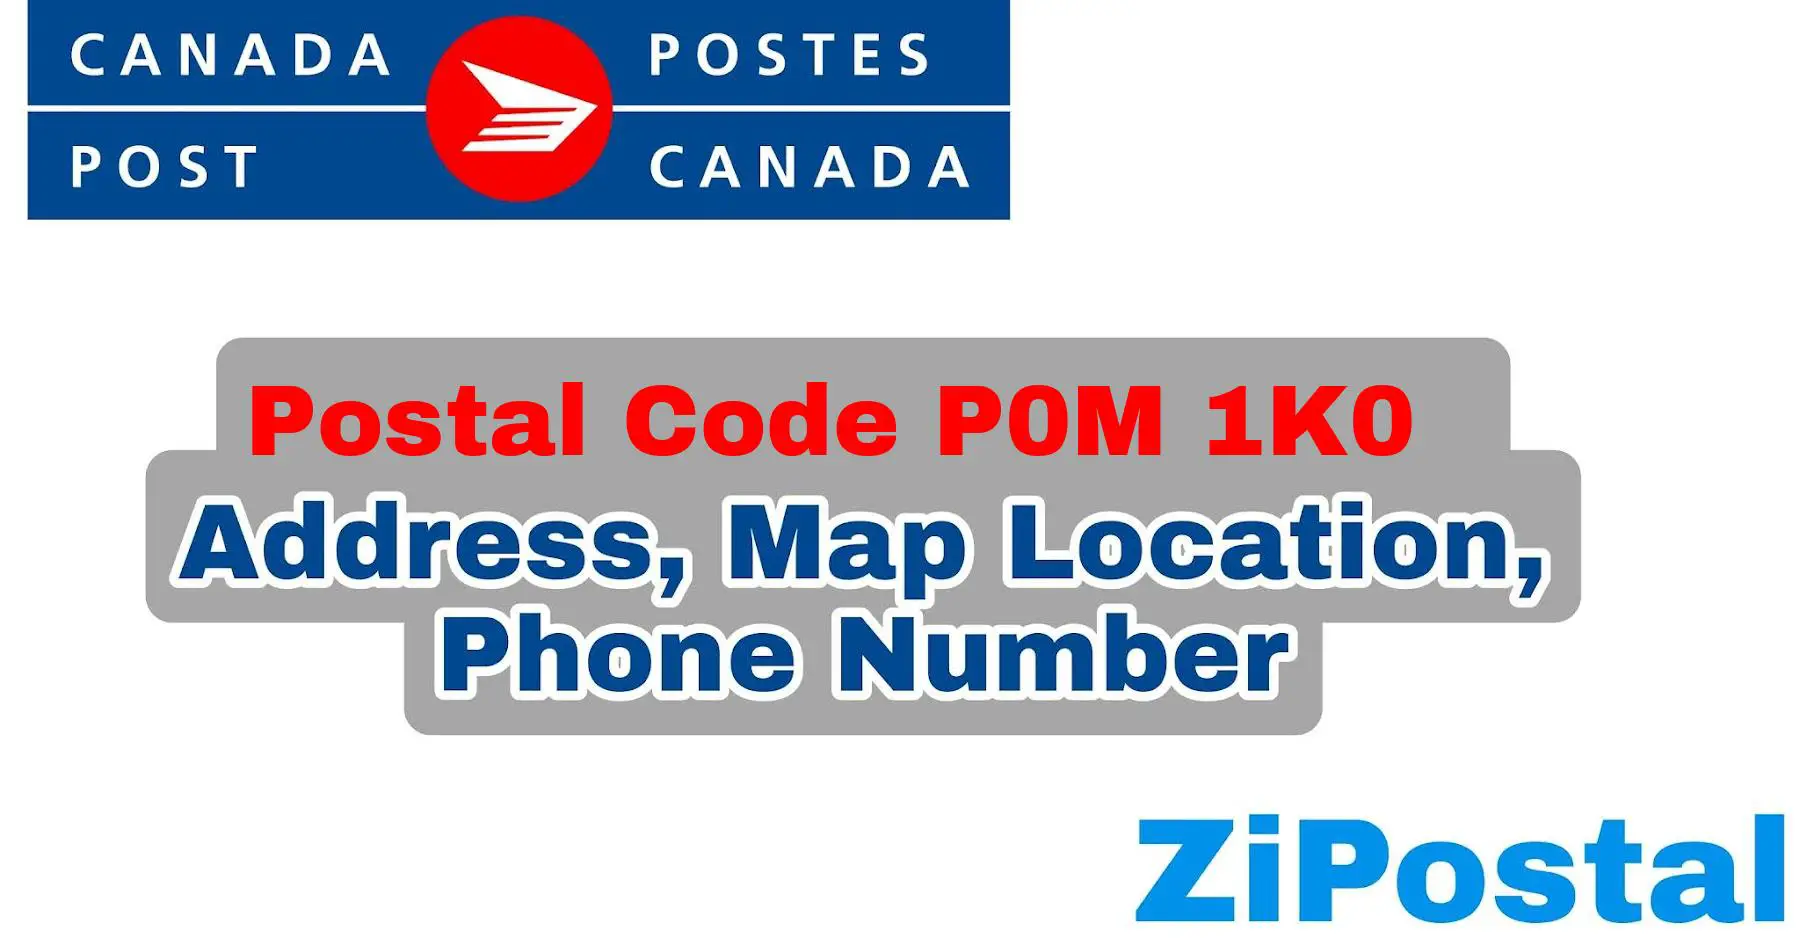 Postal Code P0M 1K0 Address Map Location and Phone Number